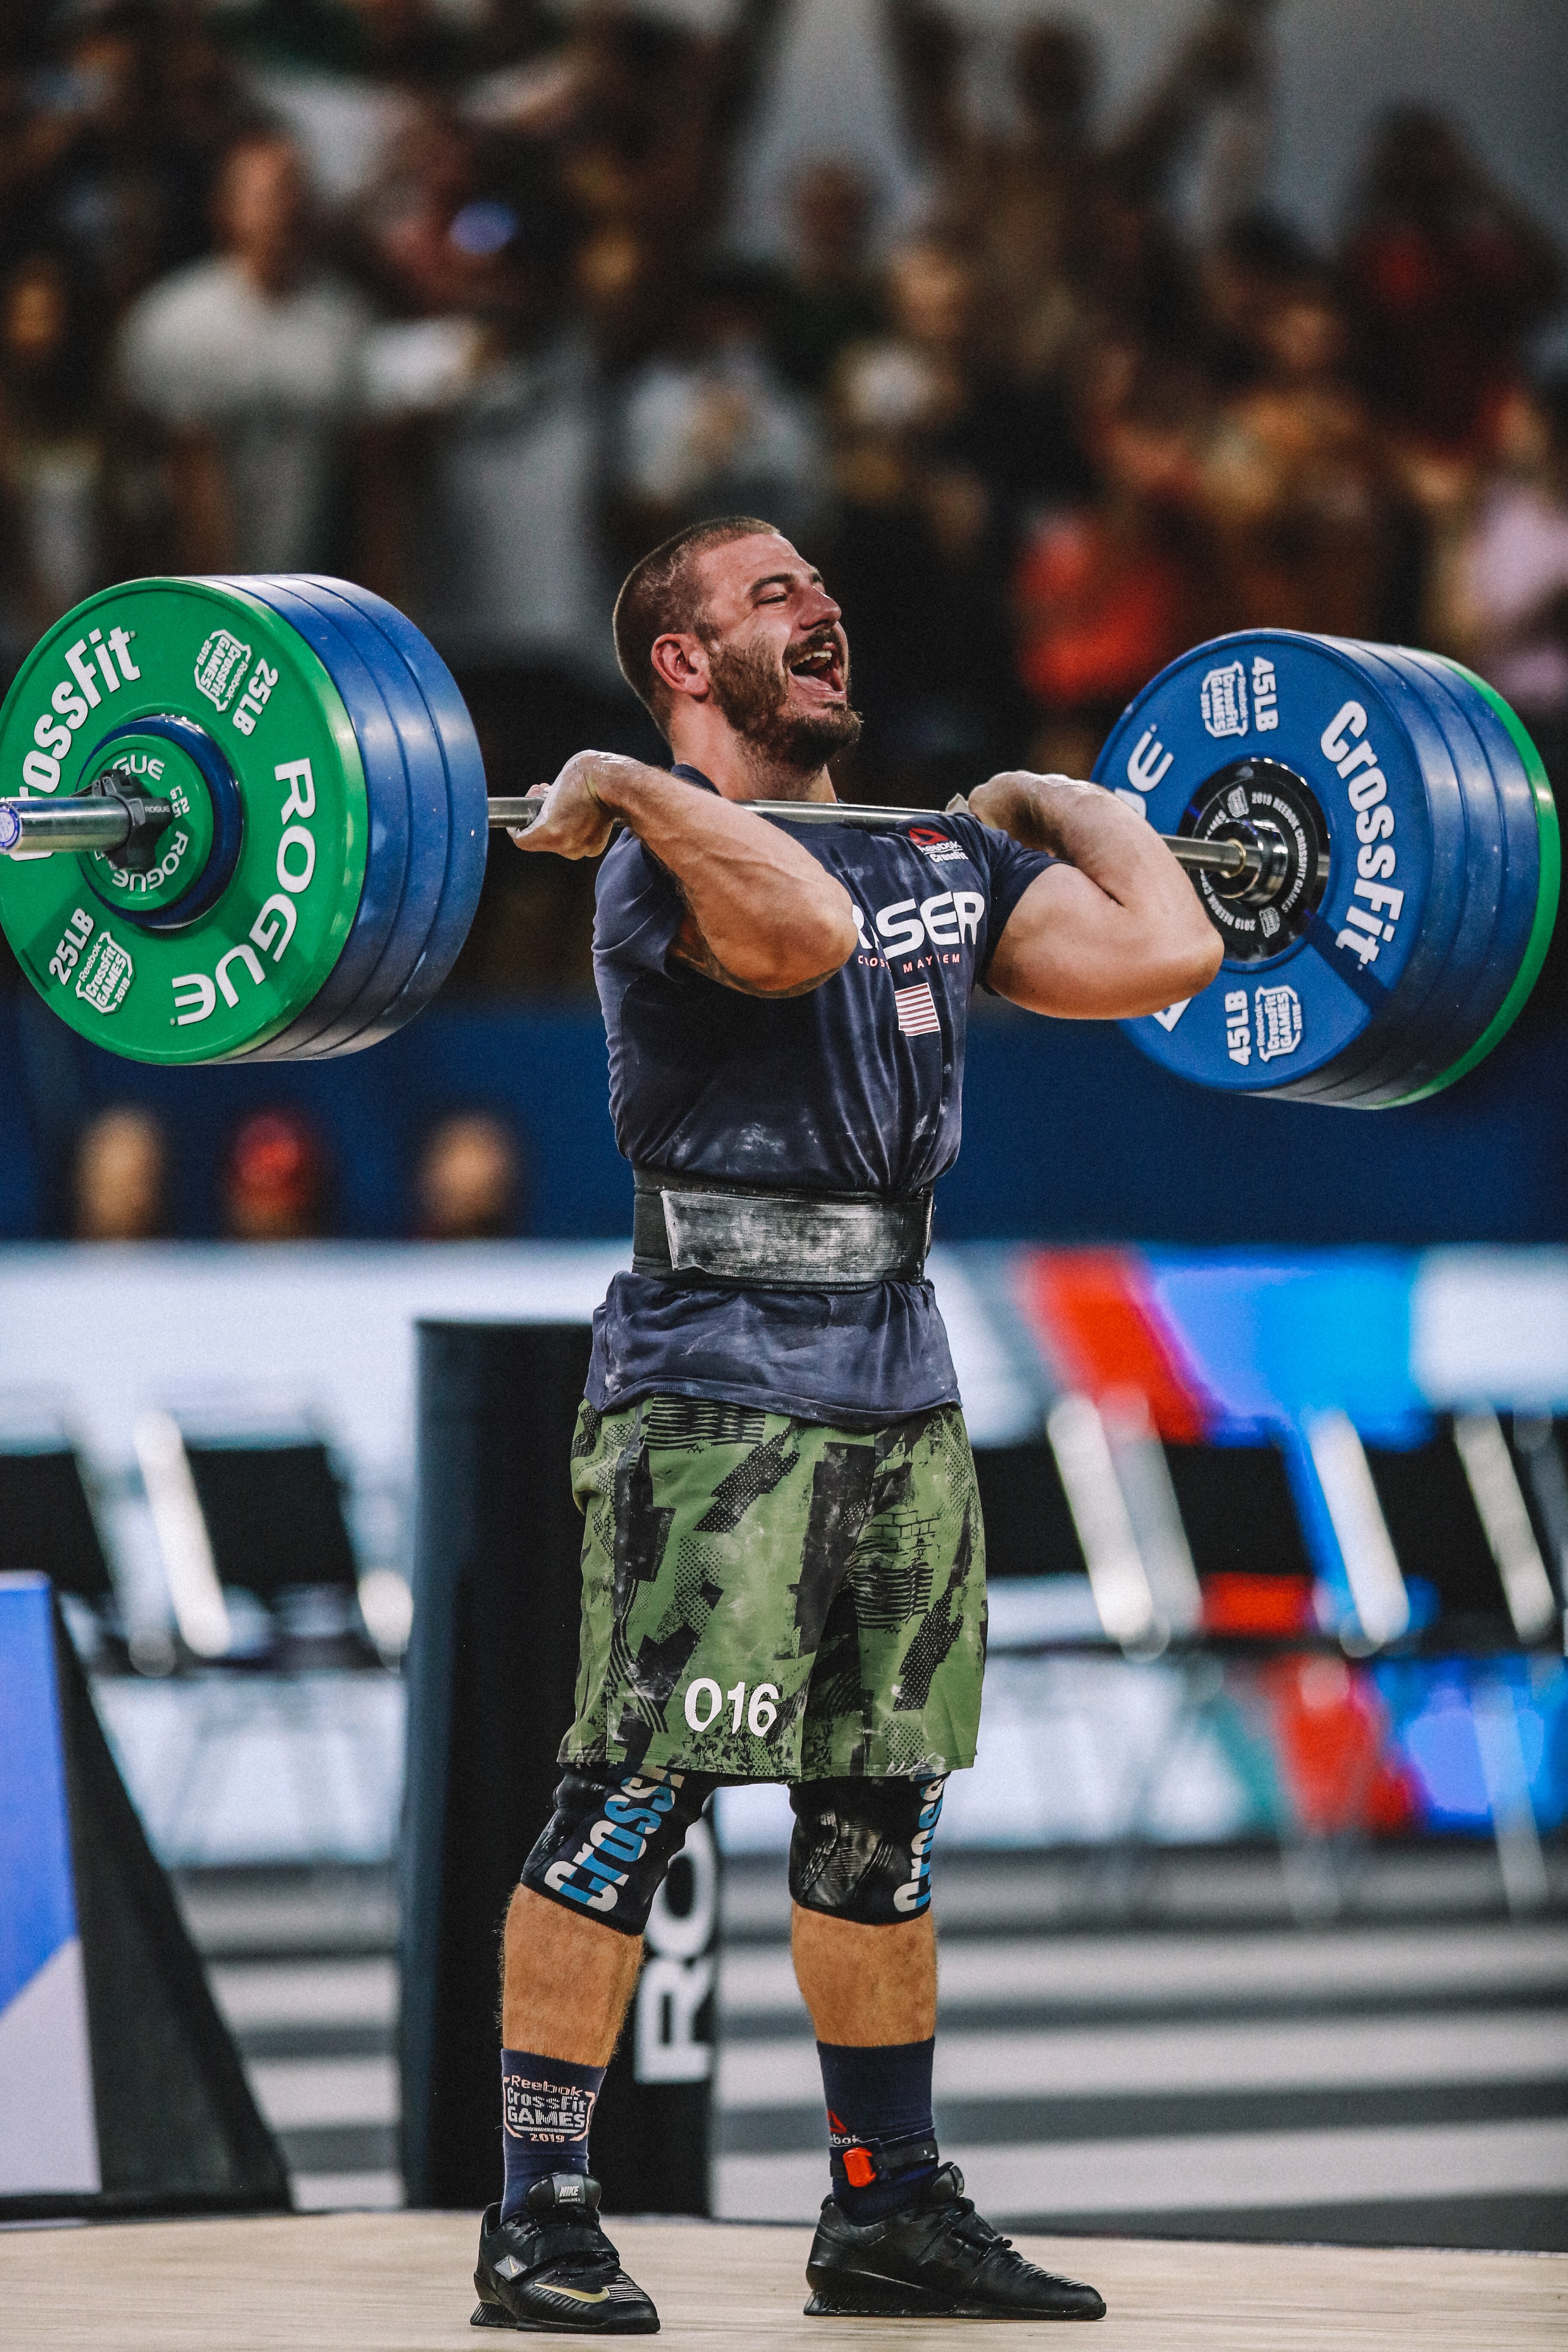 CrossFit Games 2019: cuts divide social media users after being this year | South China Morning Post